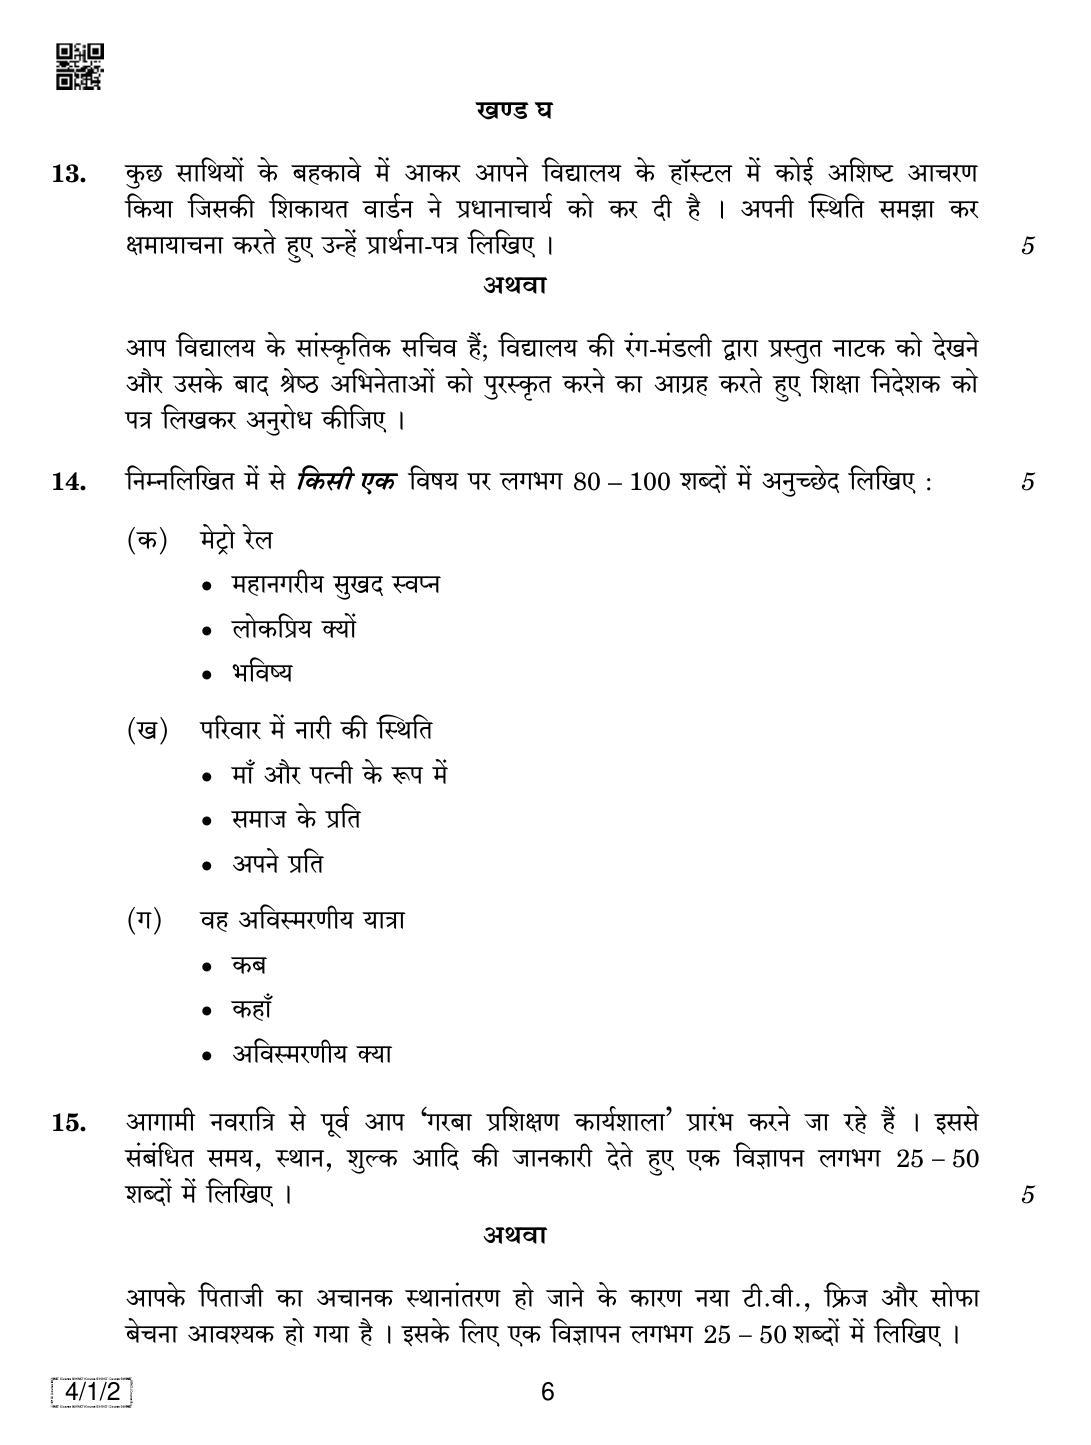 CBSE Class 10 4-1-2 HINDI B 2019 Compartment Question Paper - Page 6